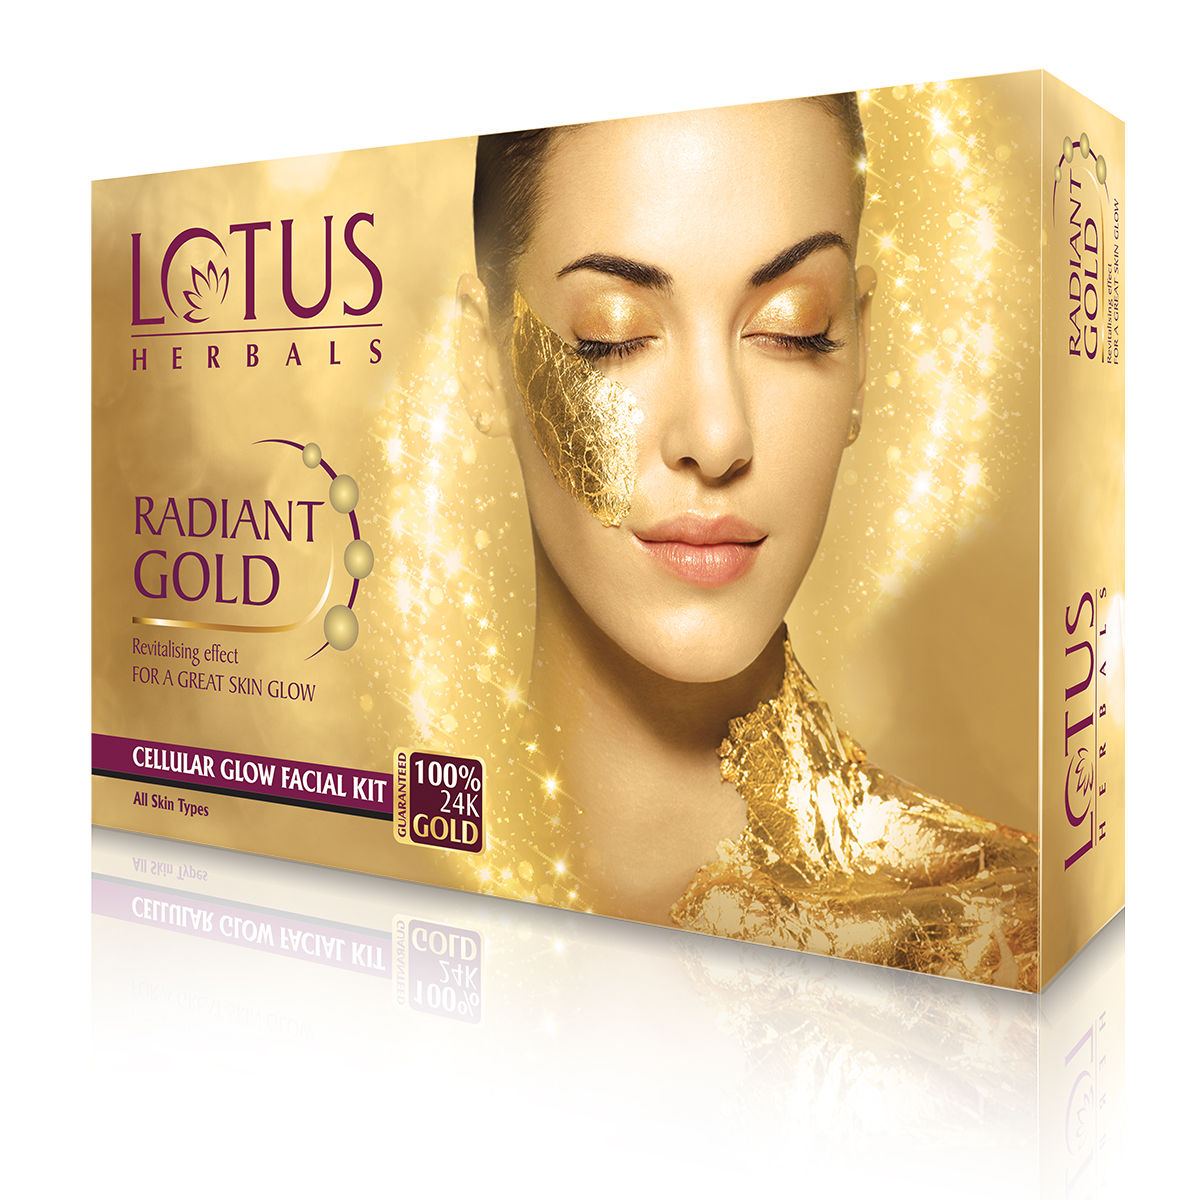 Buy Lotus Herbals Radiant Gold Cellular Glow 1 Facial Kit | With 24K Gold leaves | For Skin Glow | All Skin Types | 37g - Purplle